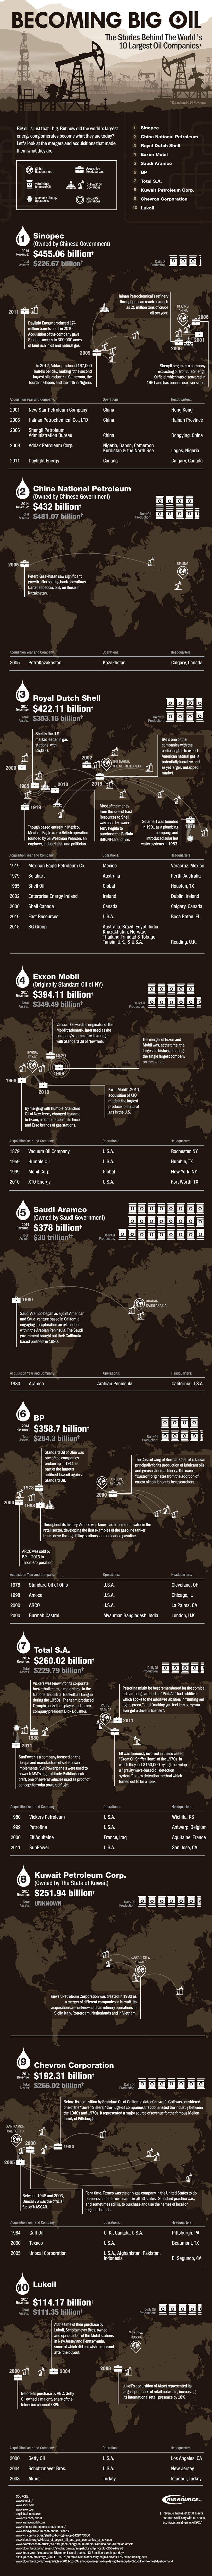 Becoming Big Oil: How the 10 Largest Oil Companies Were Born